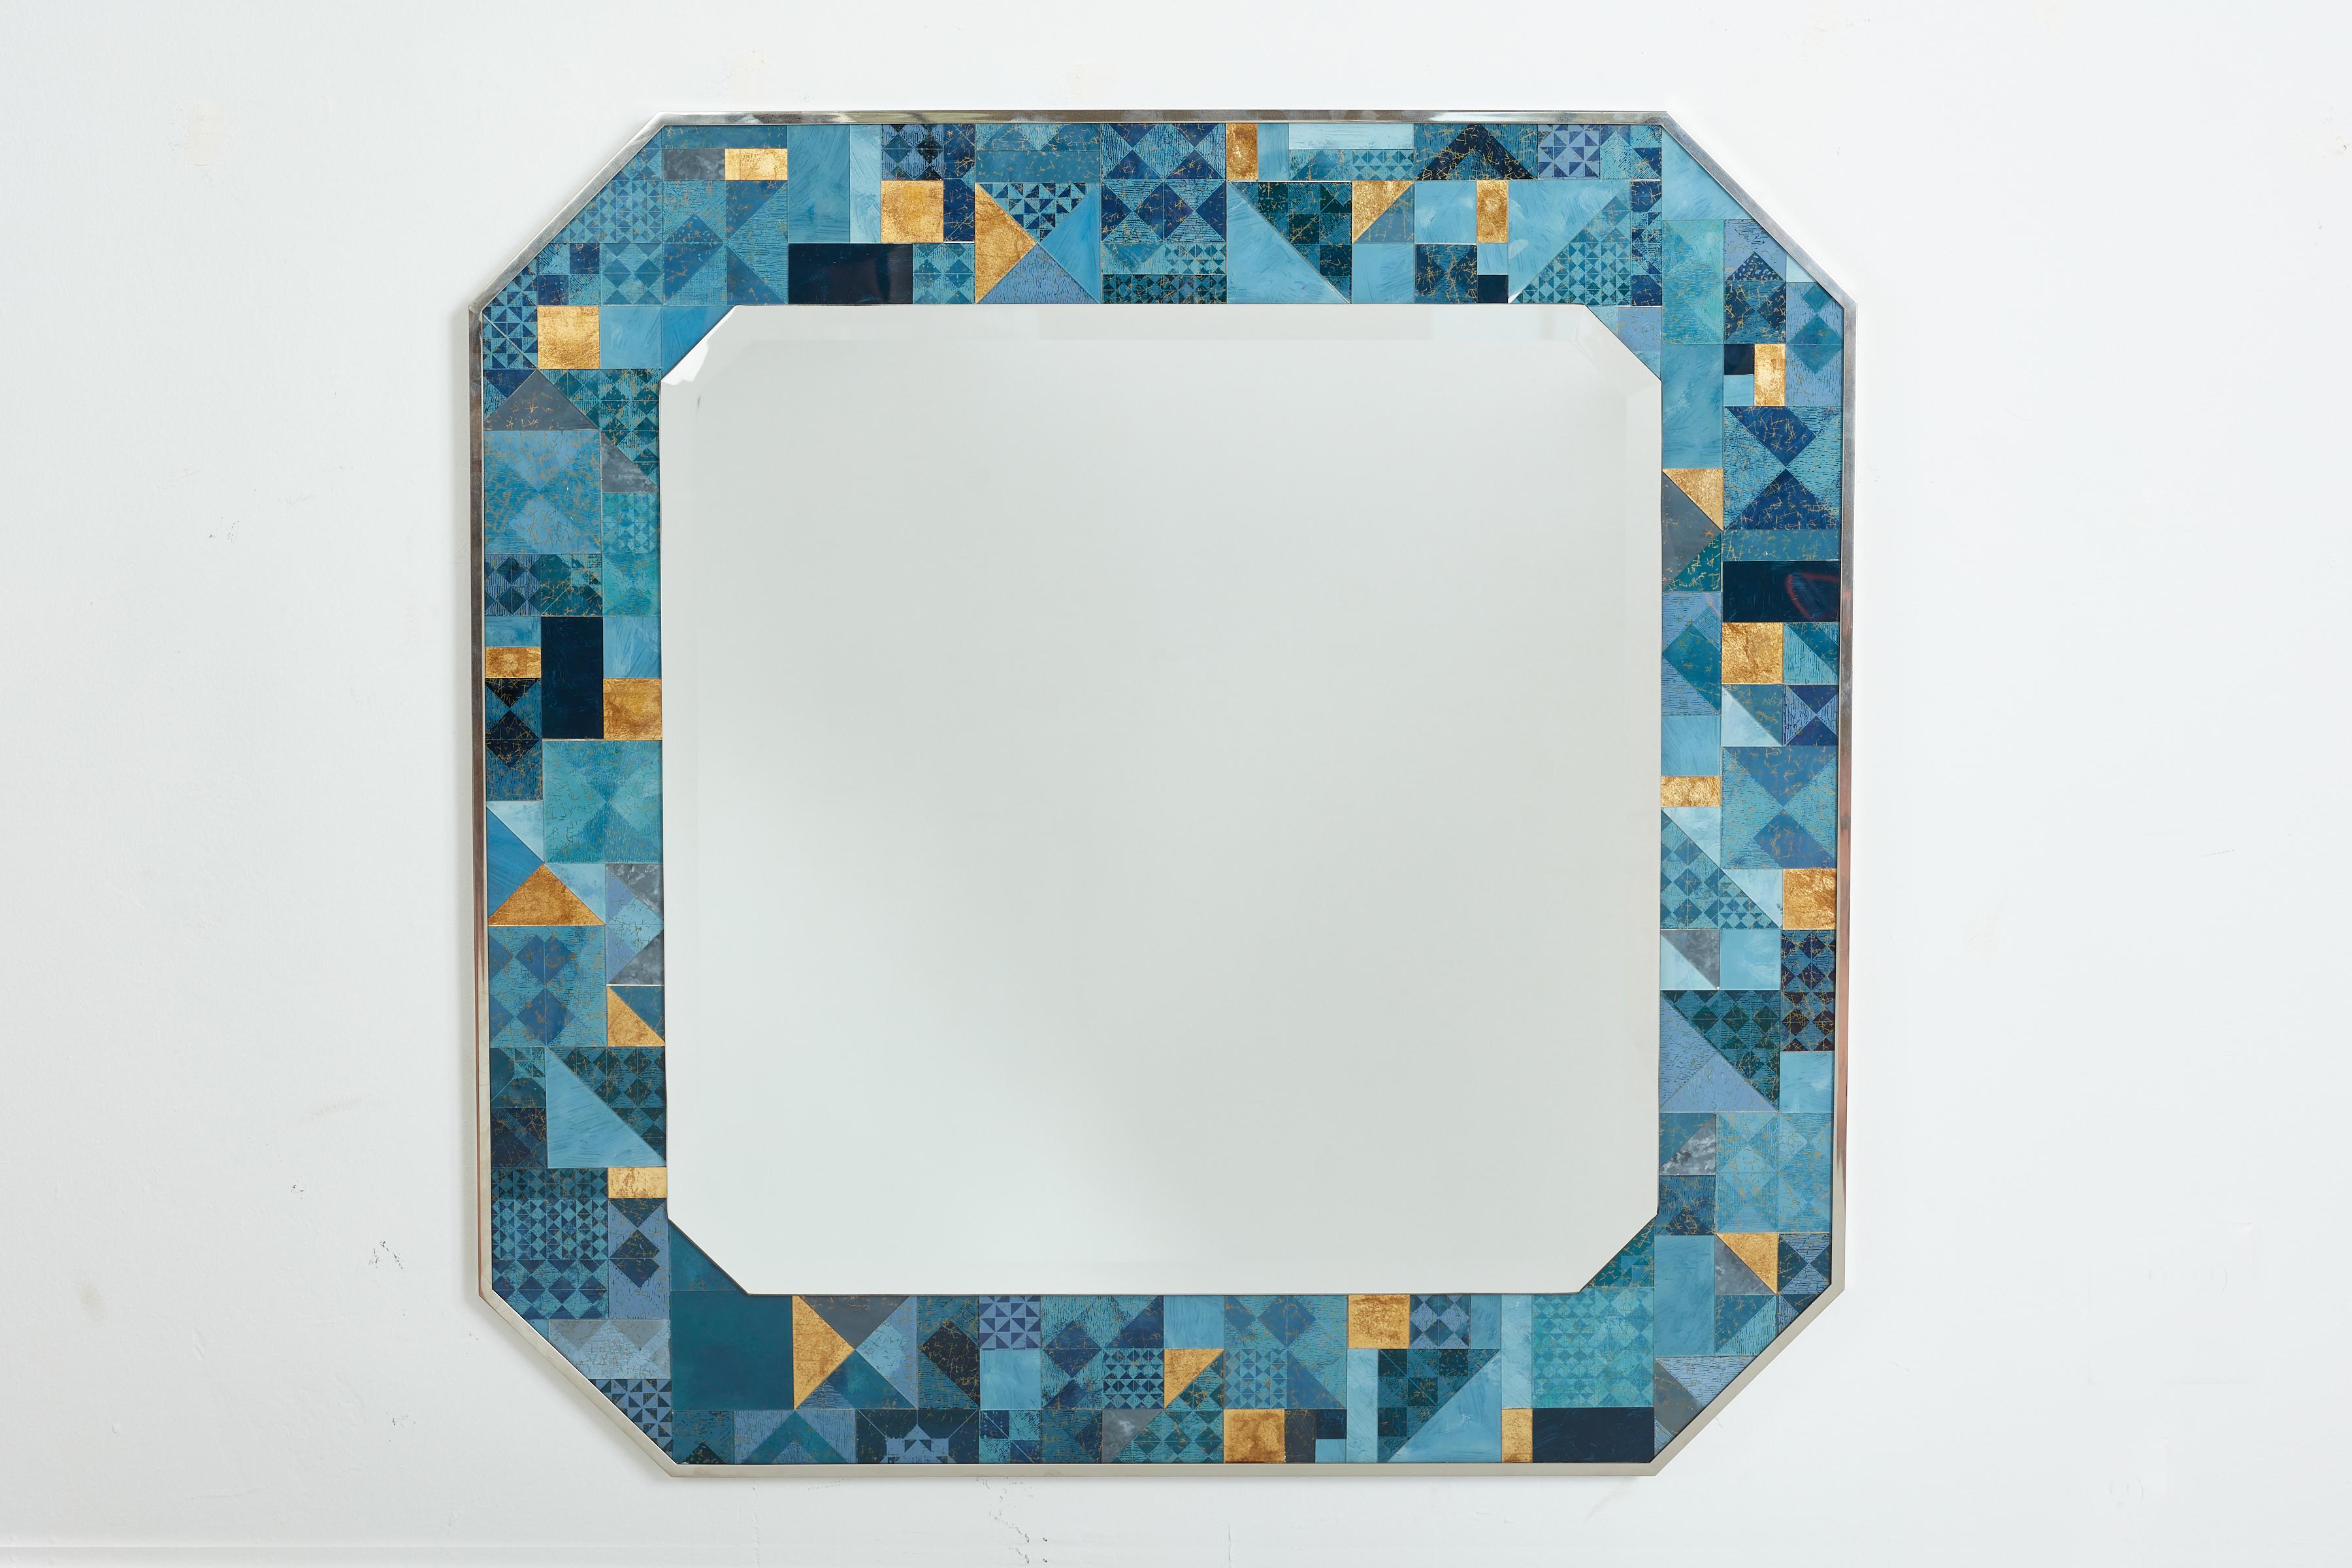 Italian wall mirror by Gallotti and Radice 
Italy, 1980s
Large in scale - 
Octagonal shape with chrome frame and geometric patterned glass decorated in different triangular shapes and shades of blue and gold. 
Original label attached - signed 1984

